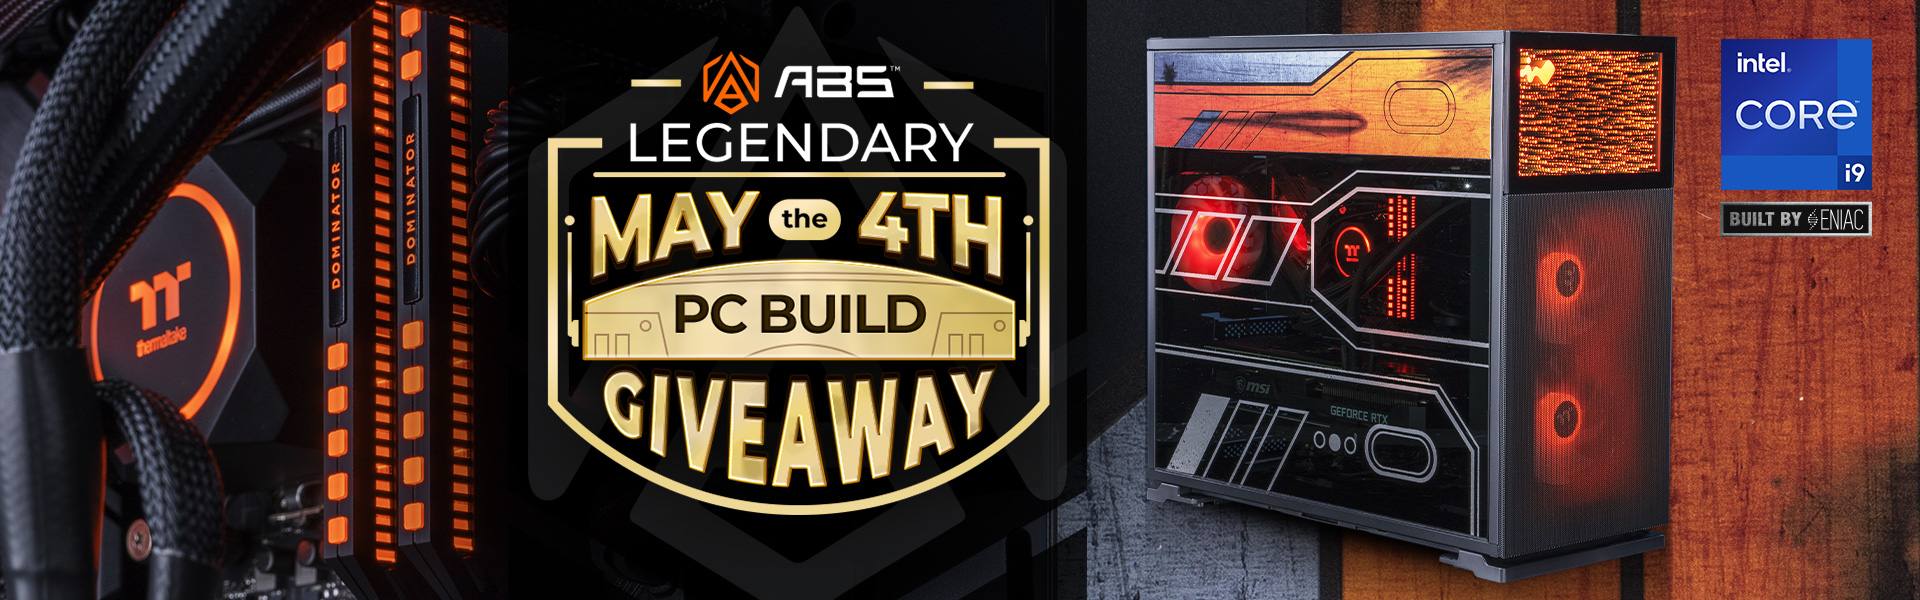 Legendary ABS May the 4th PC from Newegg Ready to Land in Users’ Spaces